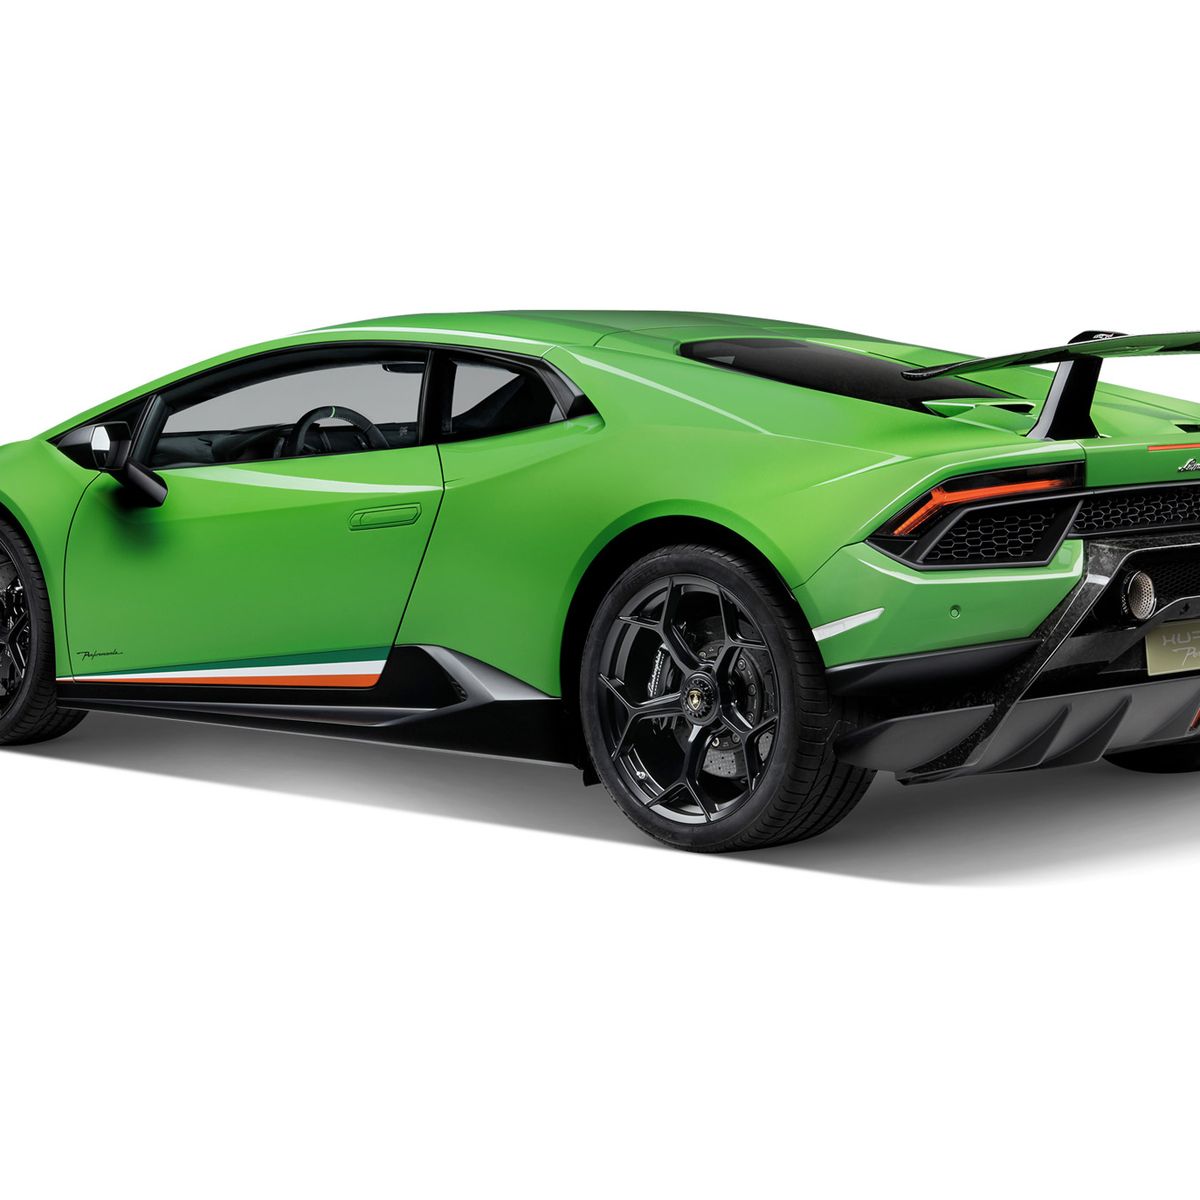 Lamborghini for 2018: What's New | Feature | Car and Driver